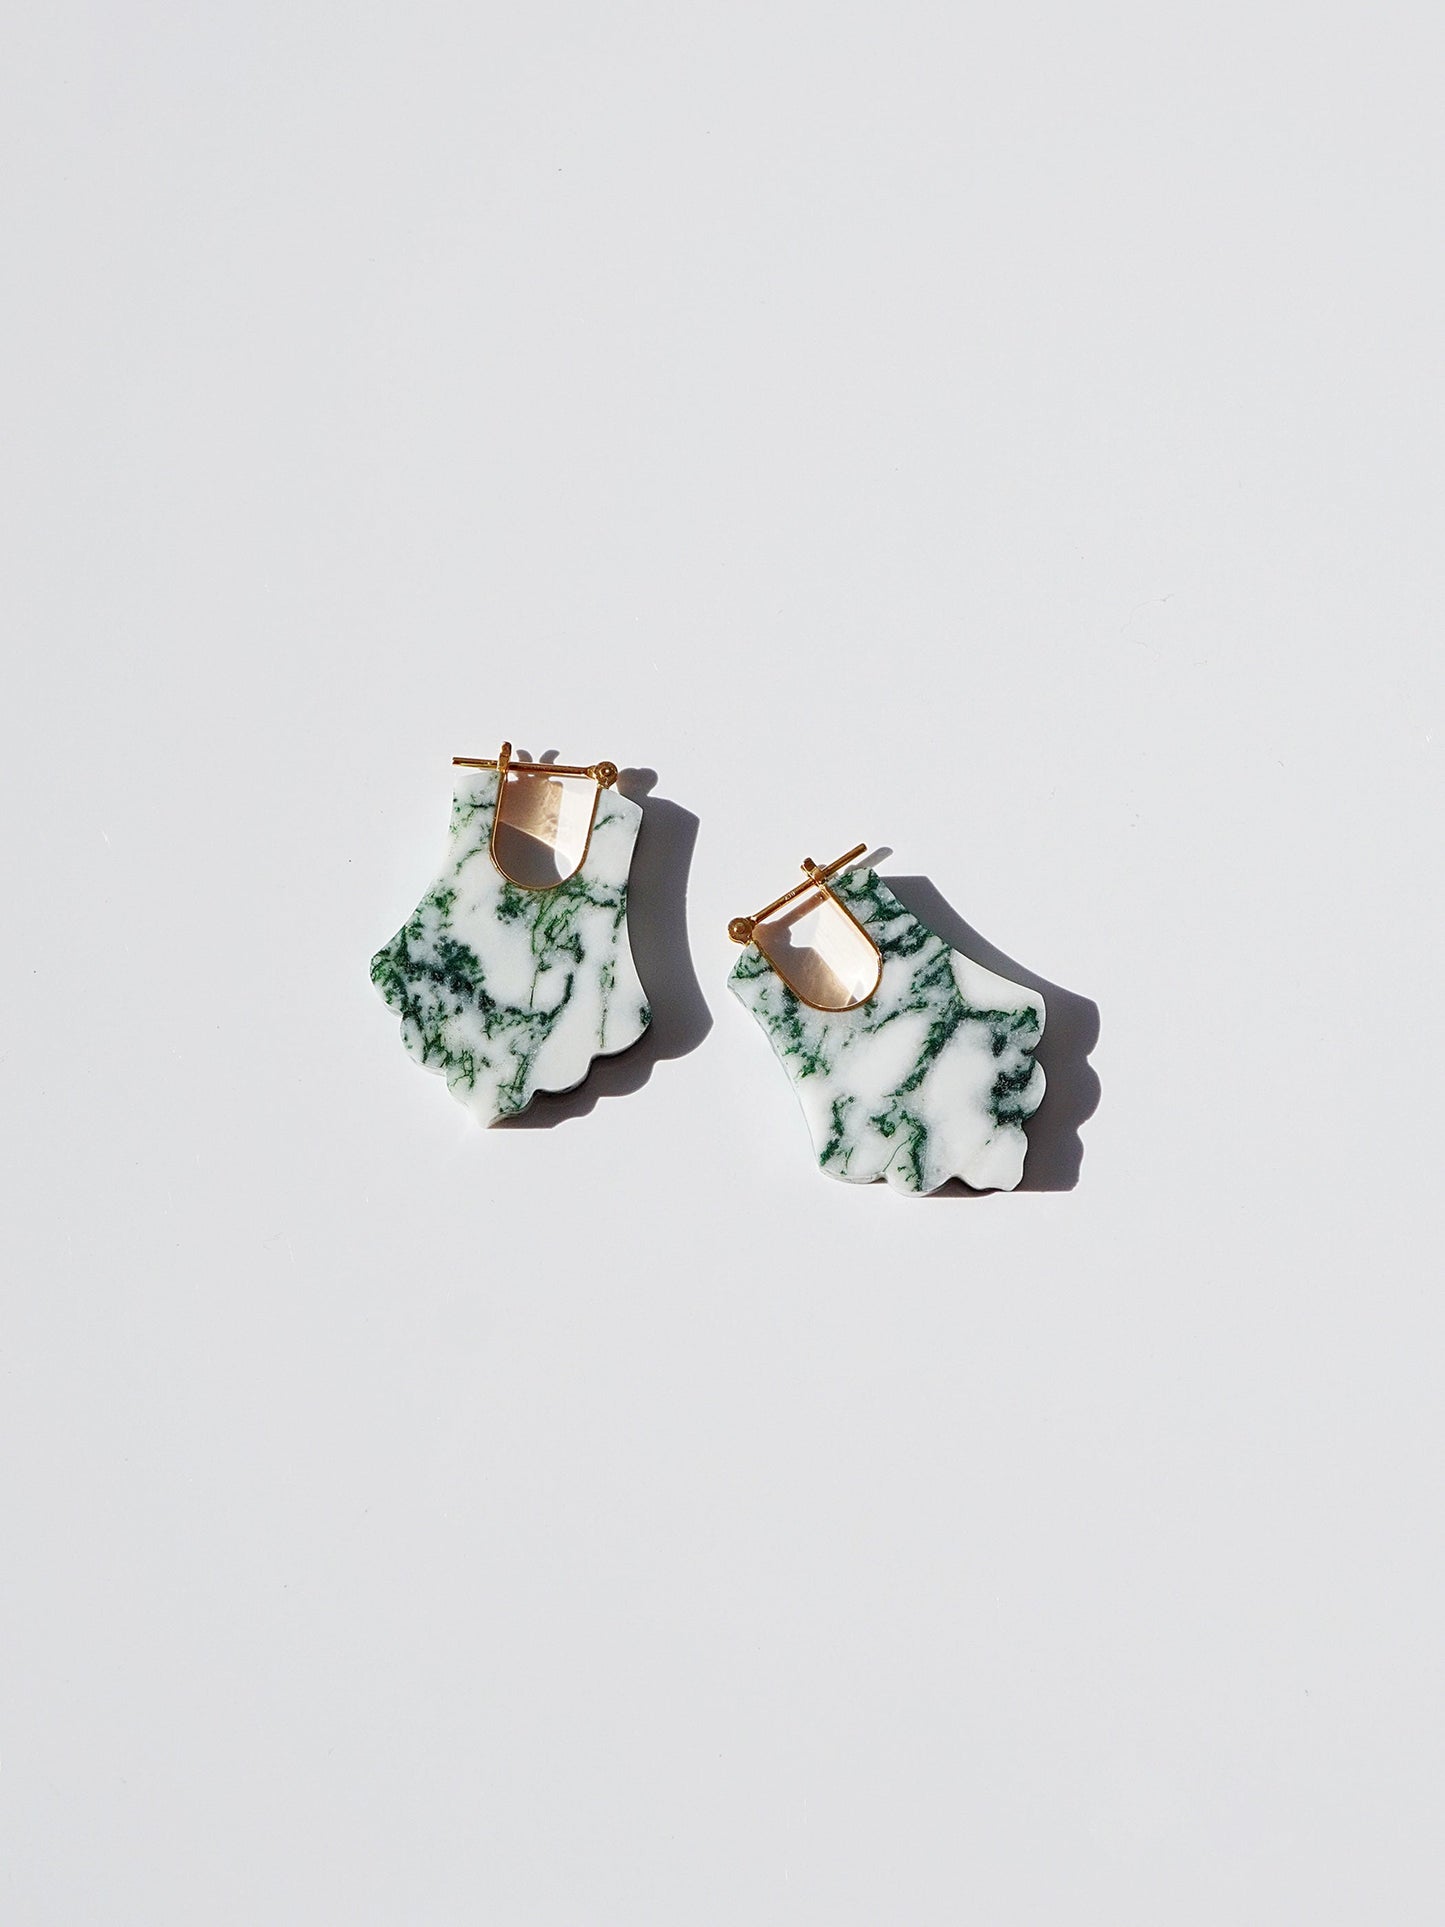 CREST_Pierced Earrings_Acanthus_White Moss Agate